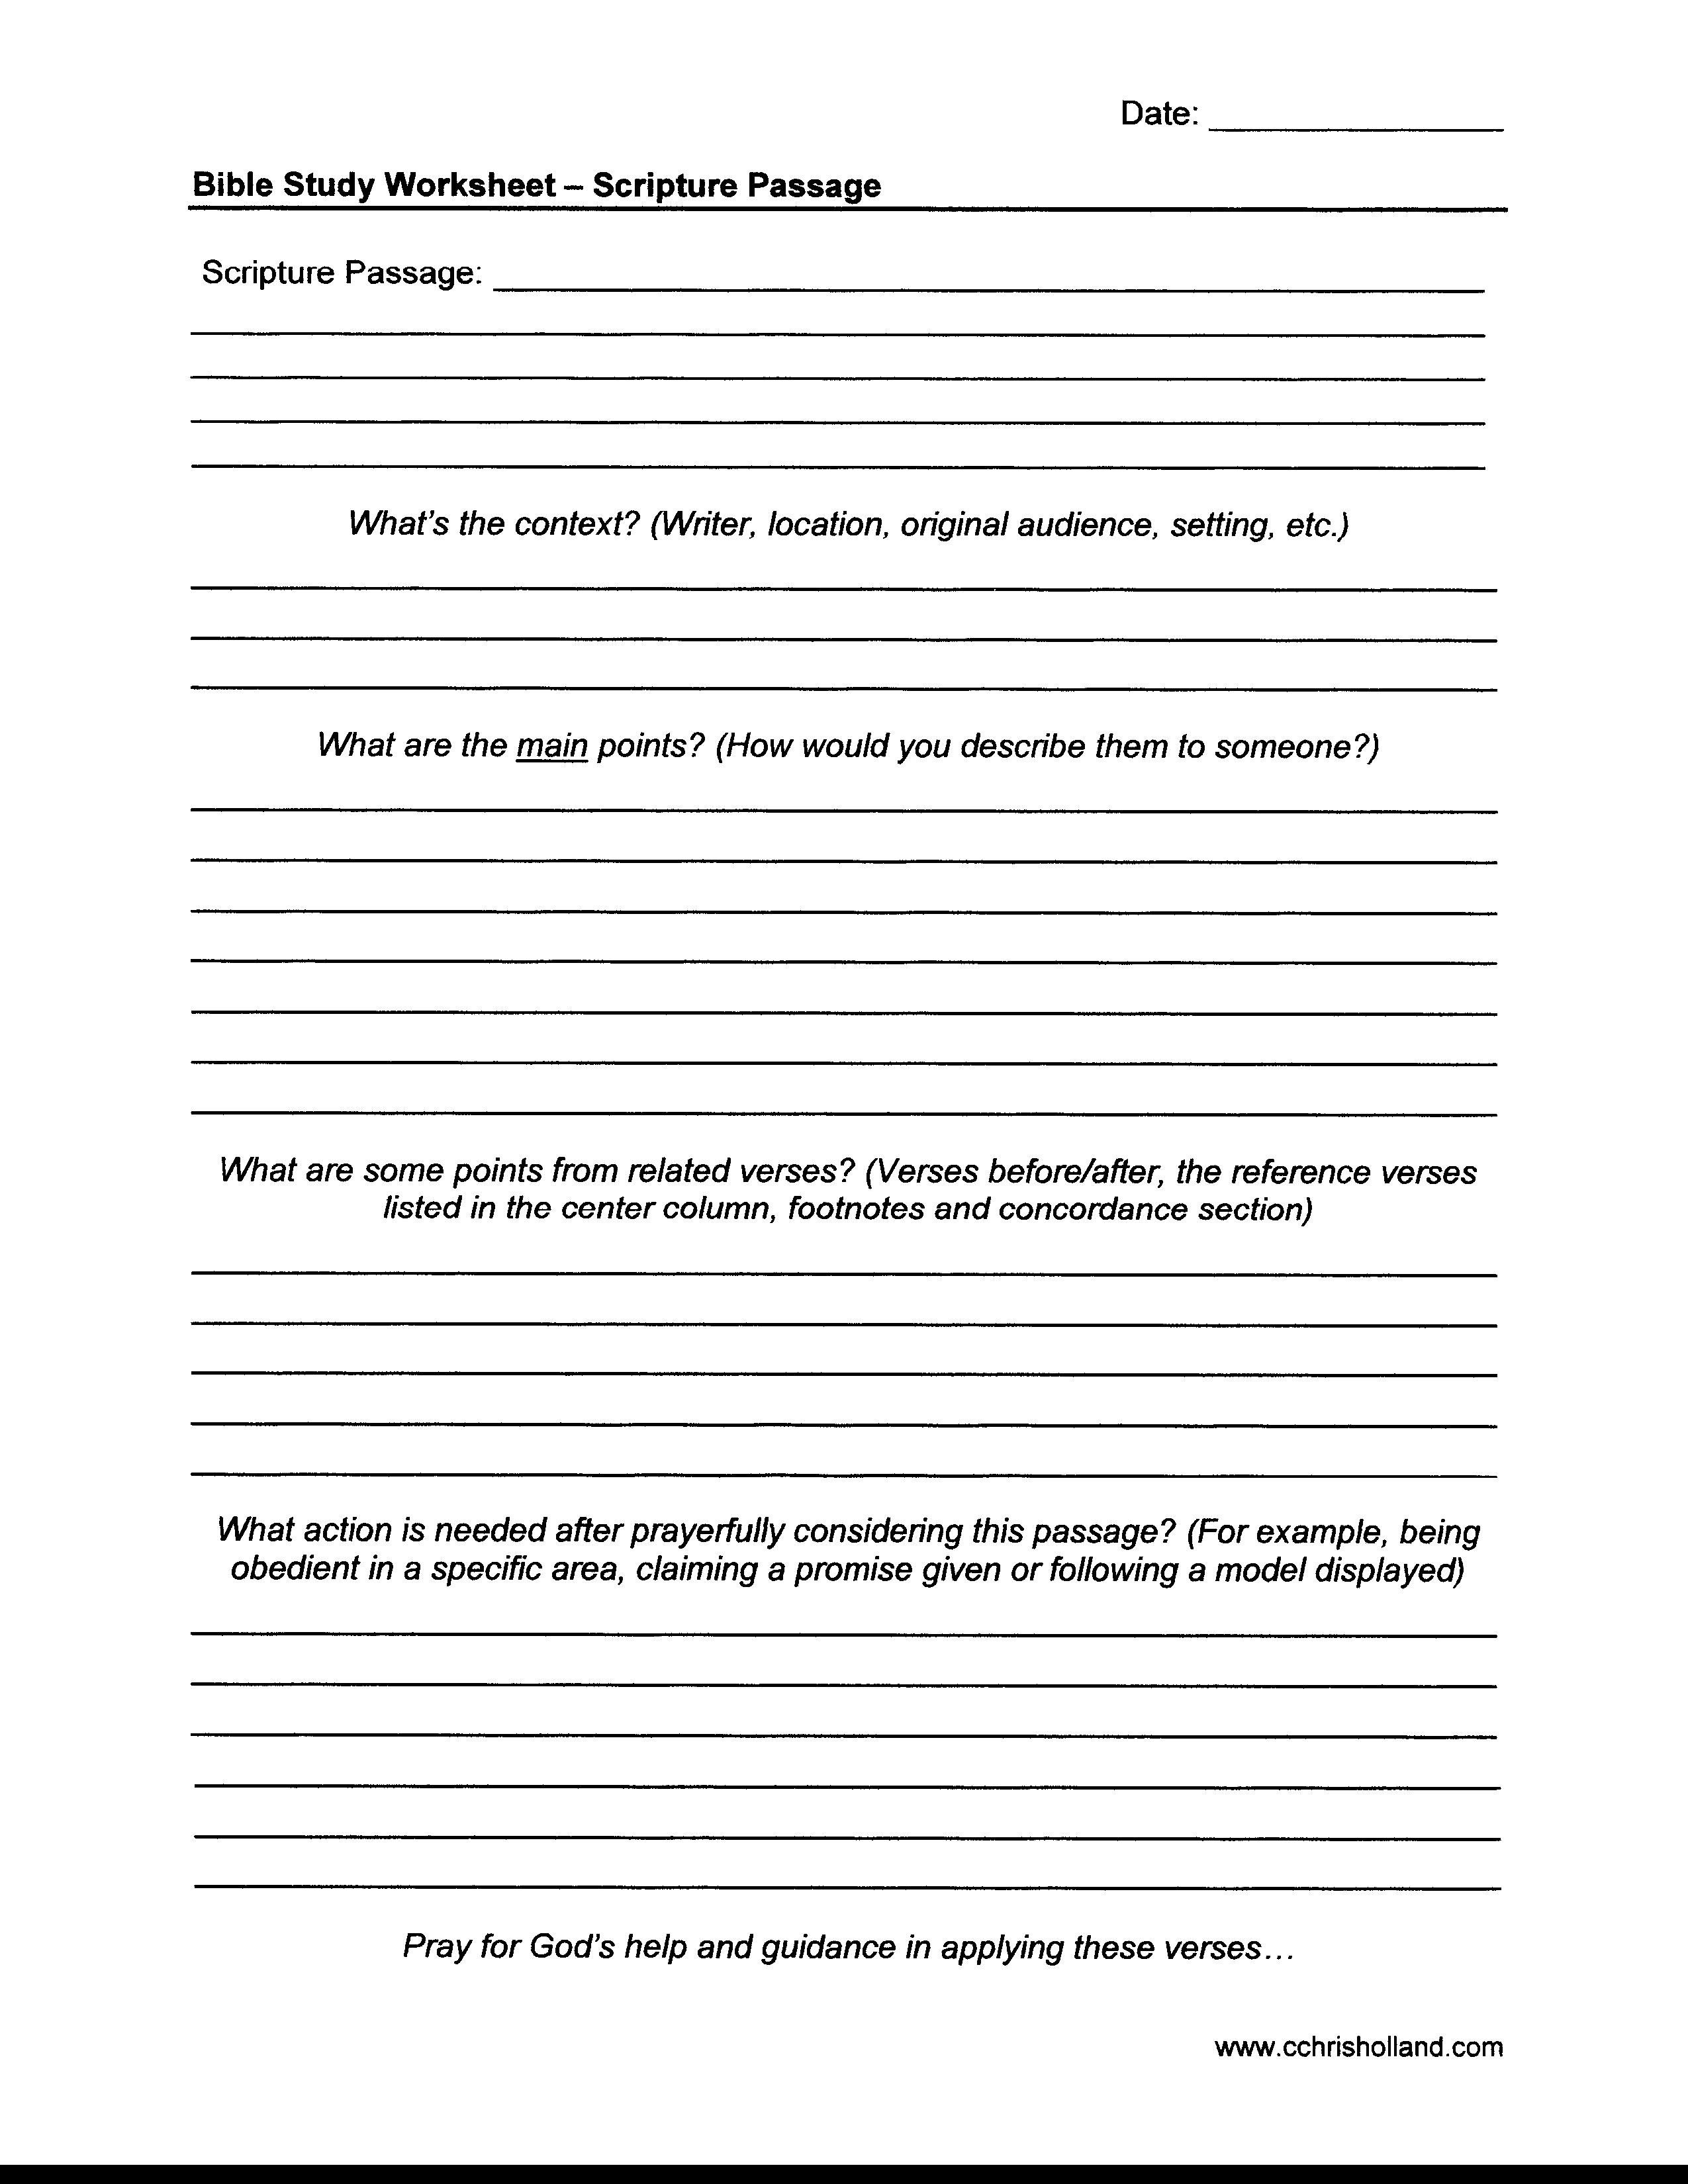 Free Printable Bible Study Worksheets (82+ Images In Collection) Page 3 - Free Printable Bible Studies For Adults